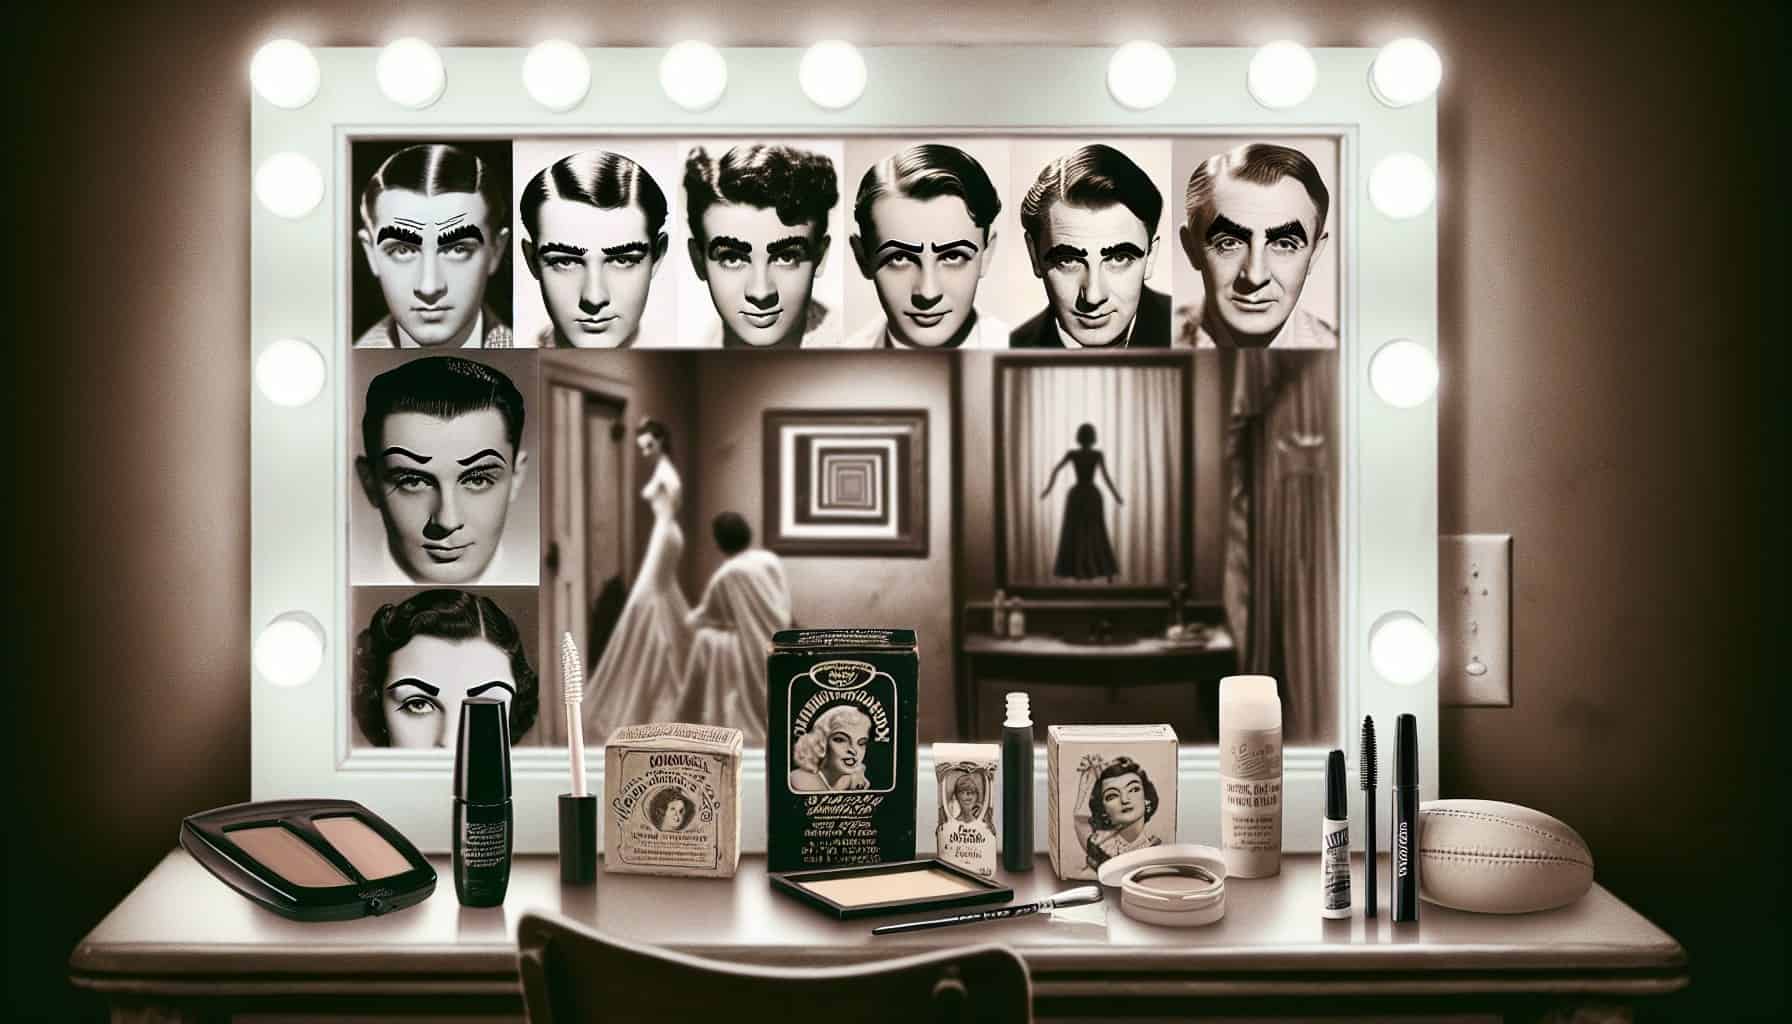 Old Hollywood eyebrows continue to influence pop culture through runway trends, film and television, and the beauty industry.